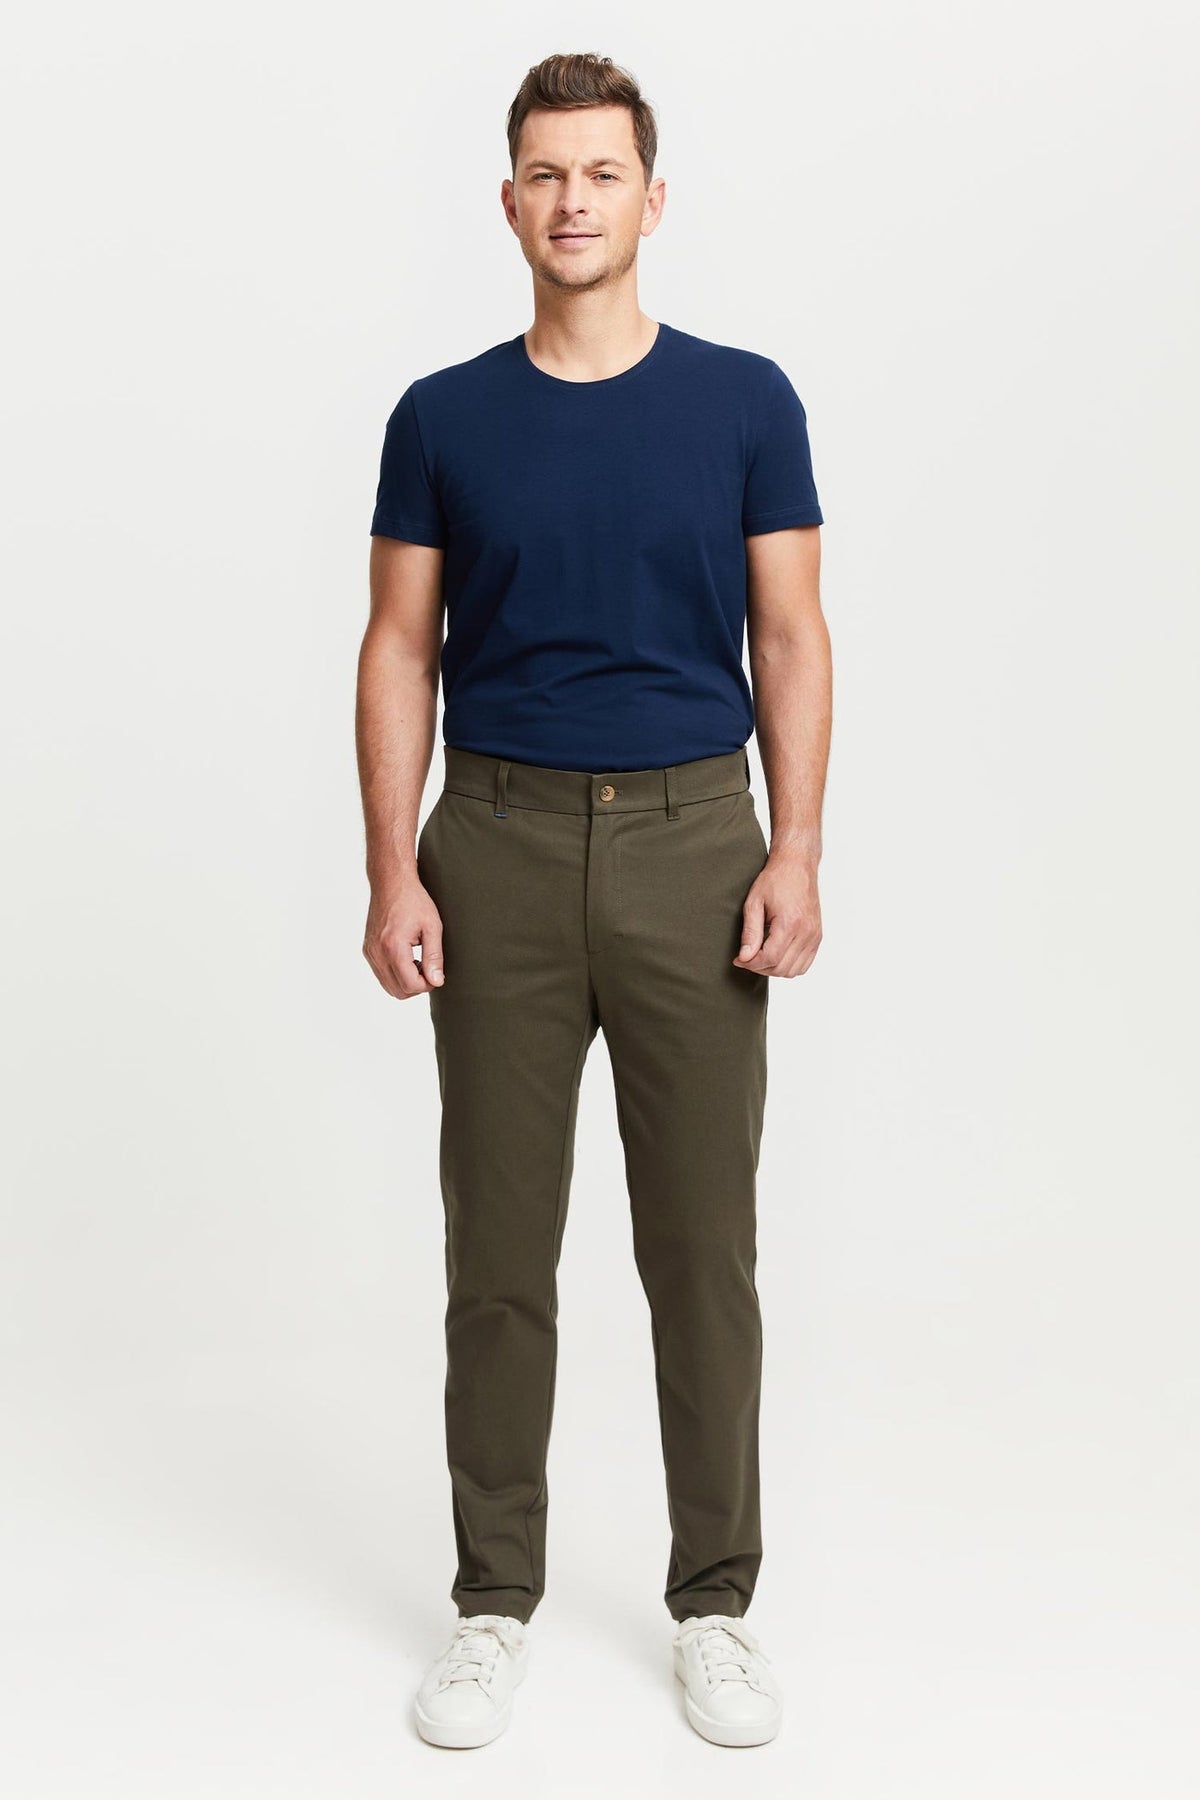 SEPPO ORGANIC COTTON CHINOS TROUSERS, Green